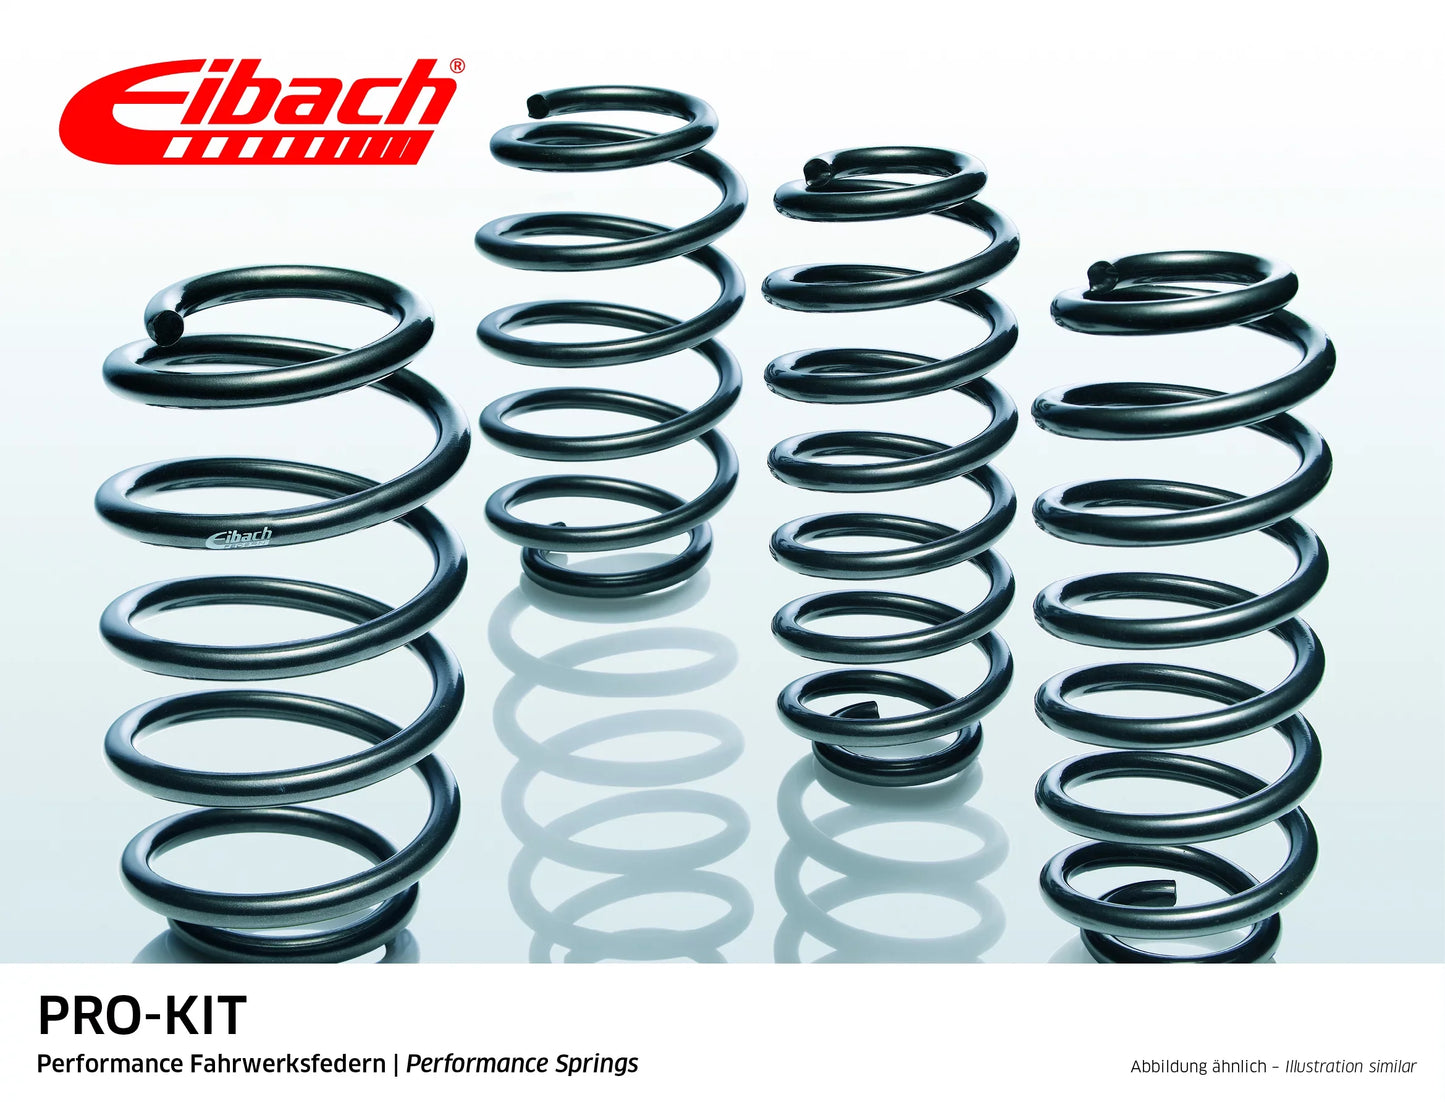 Eibach Pro-Kit Lowering Springs (E1567-140) at £283.00